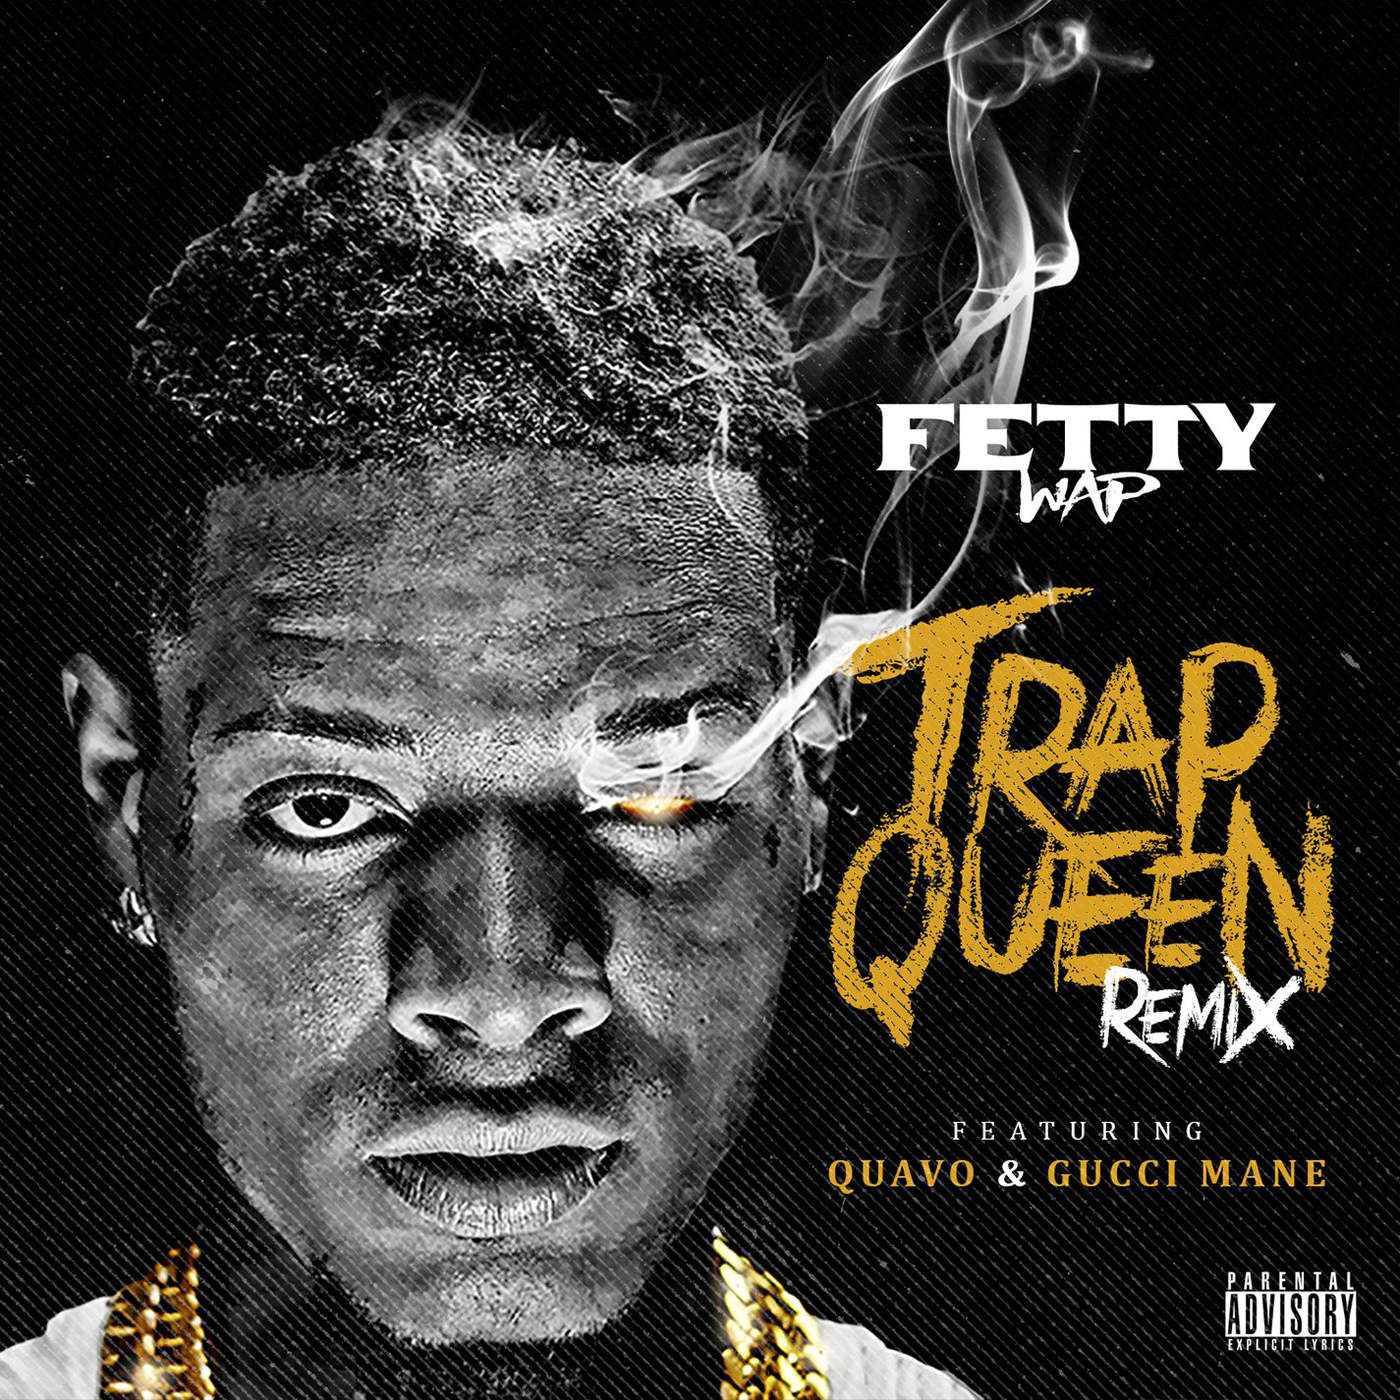 New Music Fetty Wap Trap Queen Remix Feat Azealia Banks Gucci Mane And Quavo Hiphop N